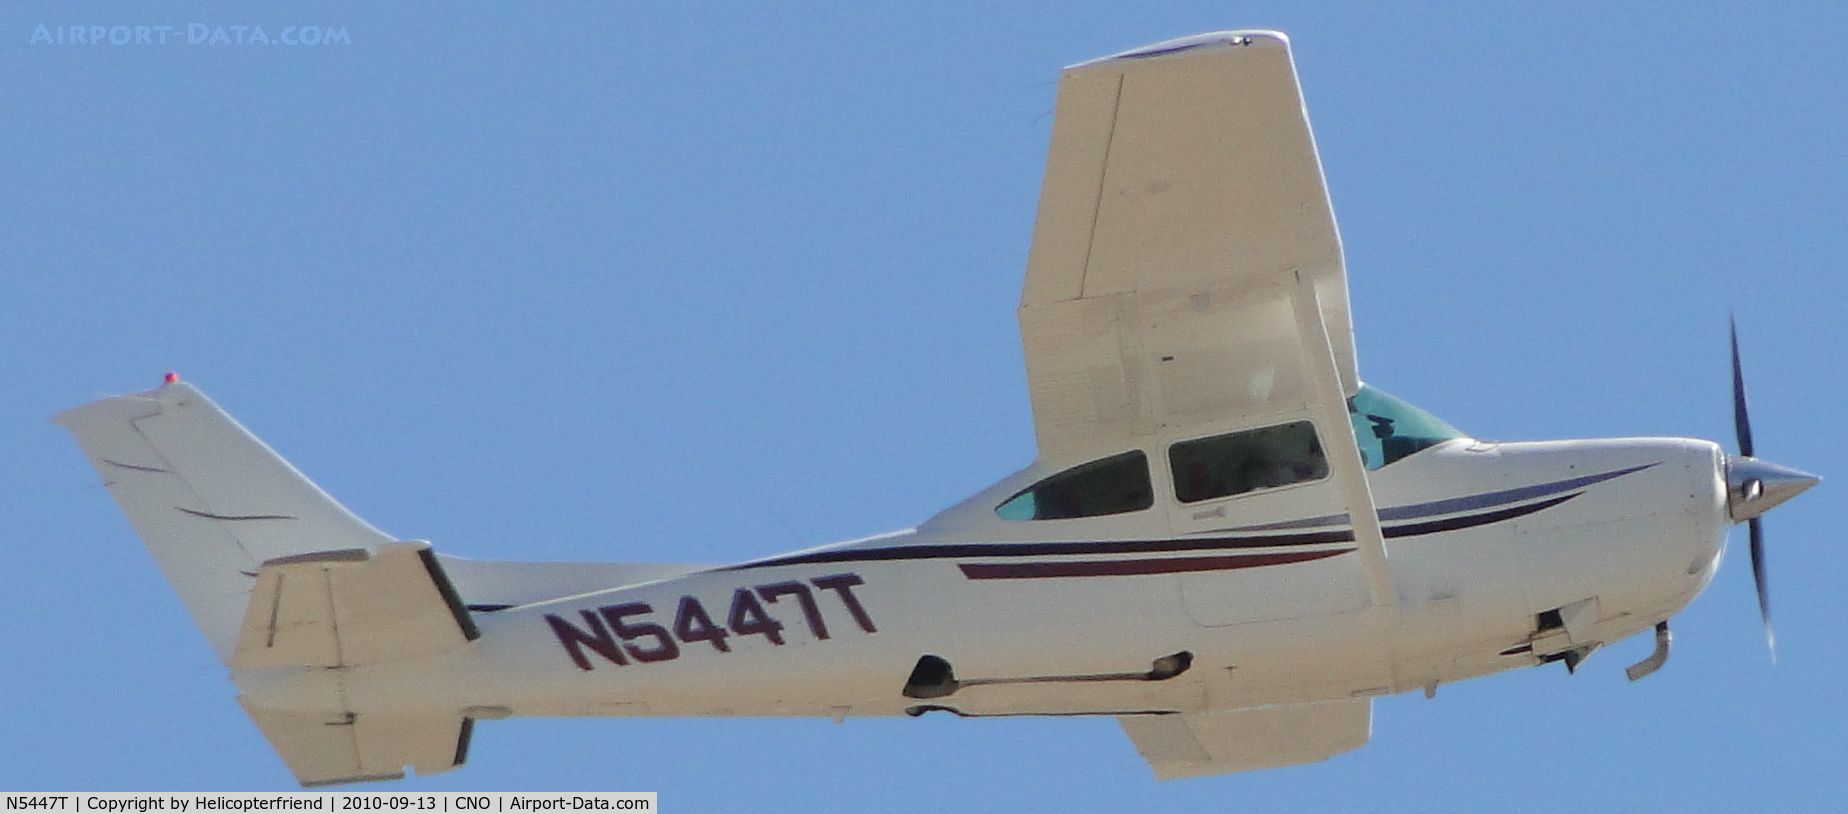 N5447T, 1982 Cessna TR182 Turbo Skylane RG C/N R18201868, Climbing out after take off from runway 26R